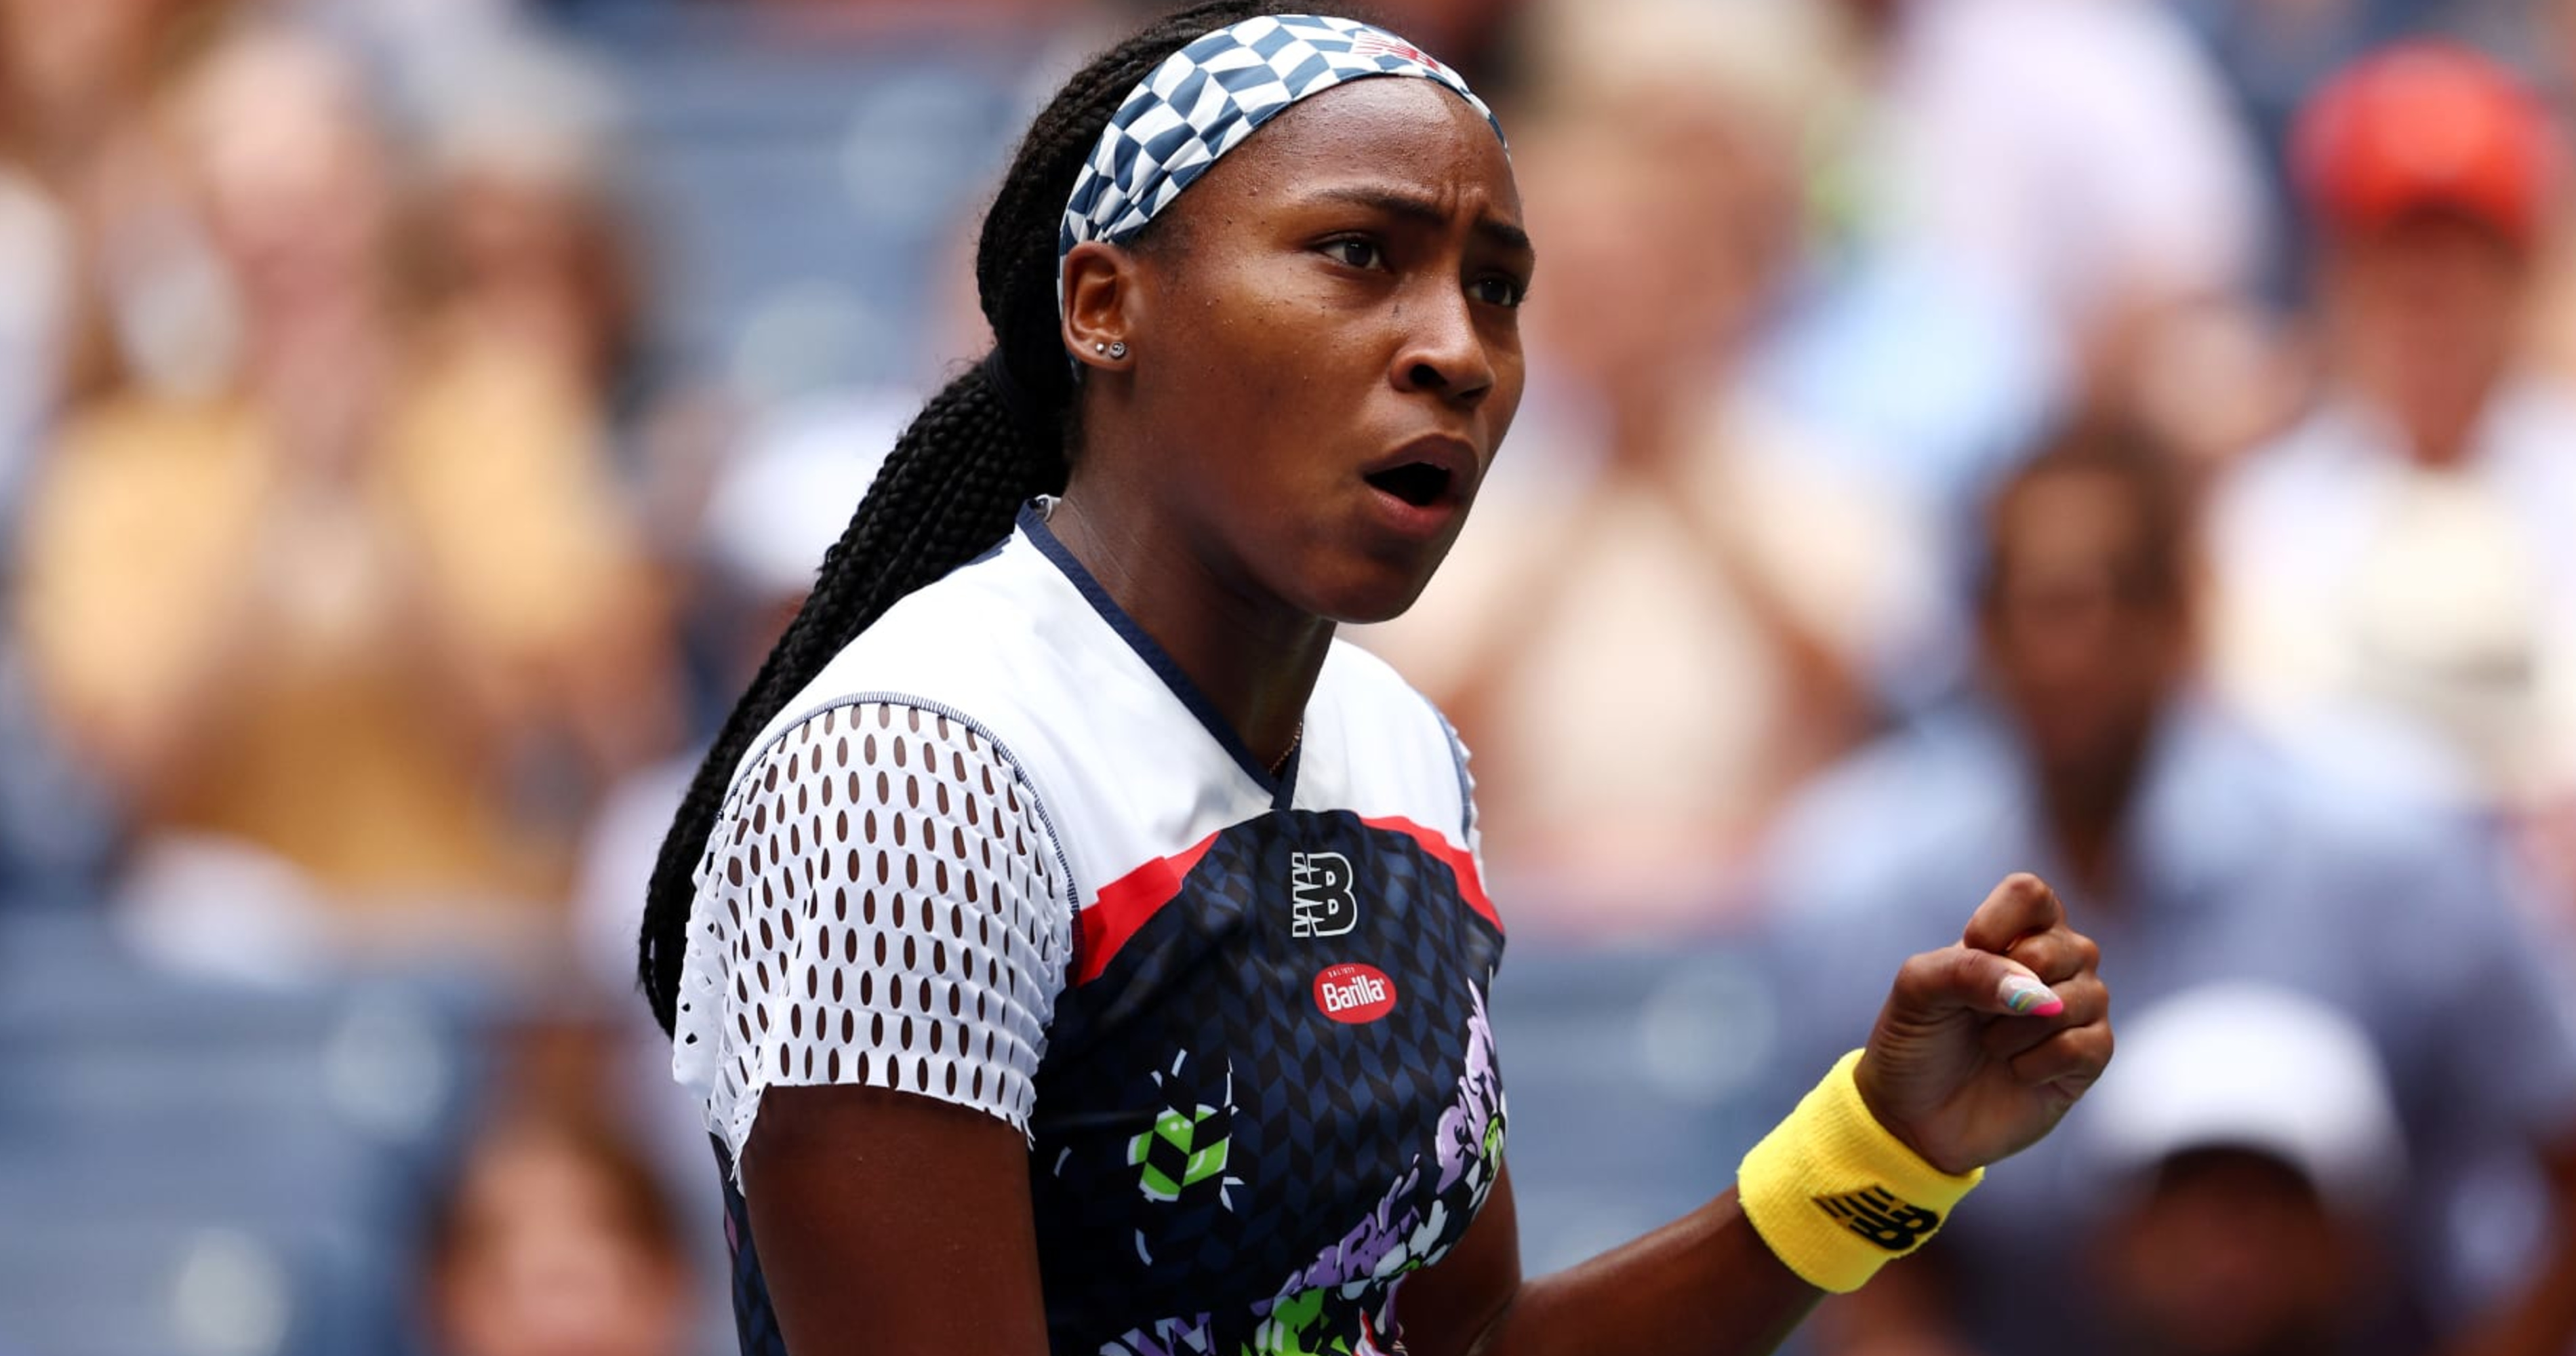 US Open Tennis 2022 Results Coco Gauff, Nick Kyrgios Advance to